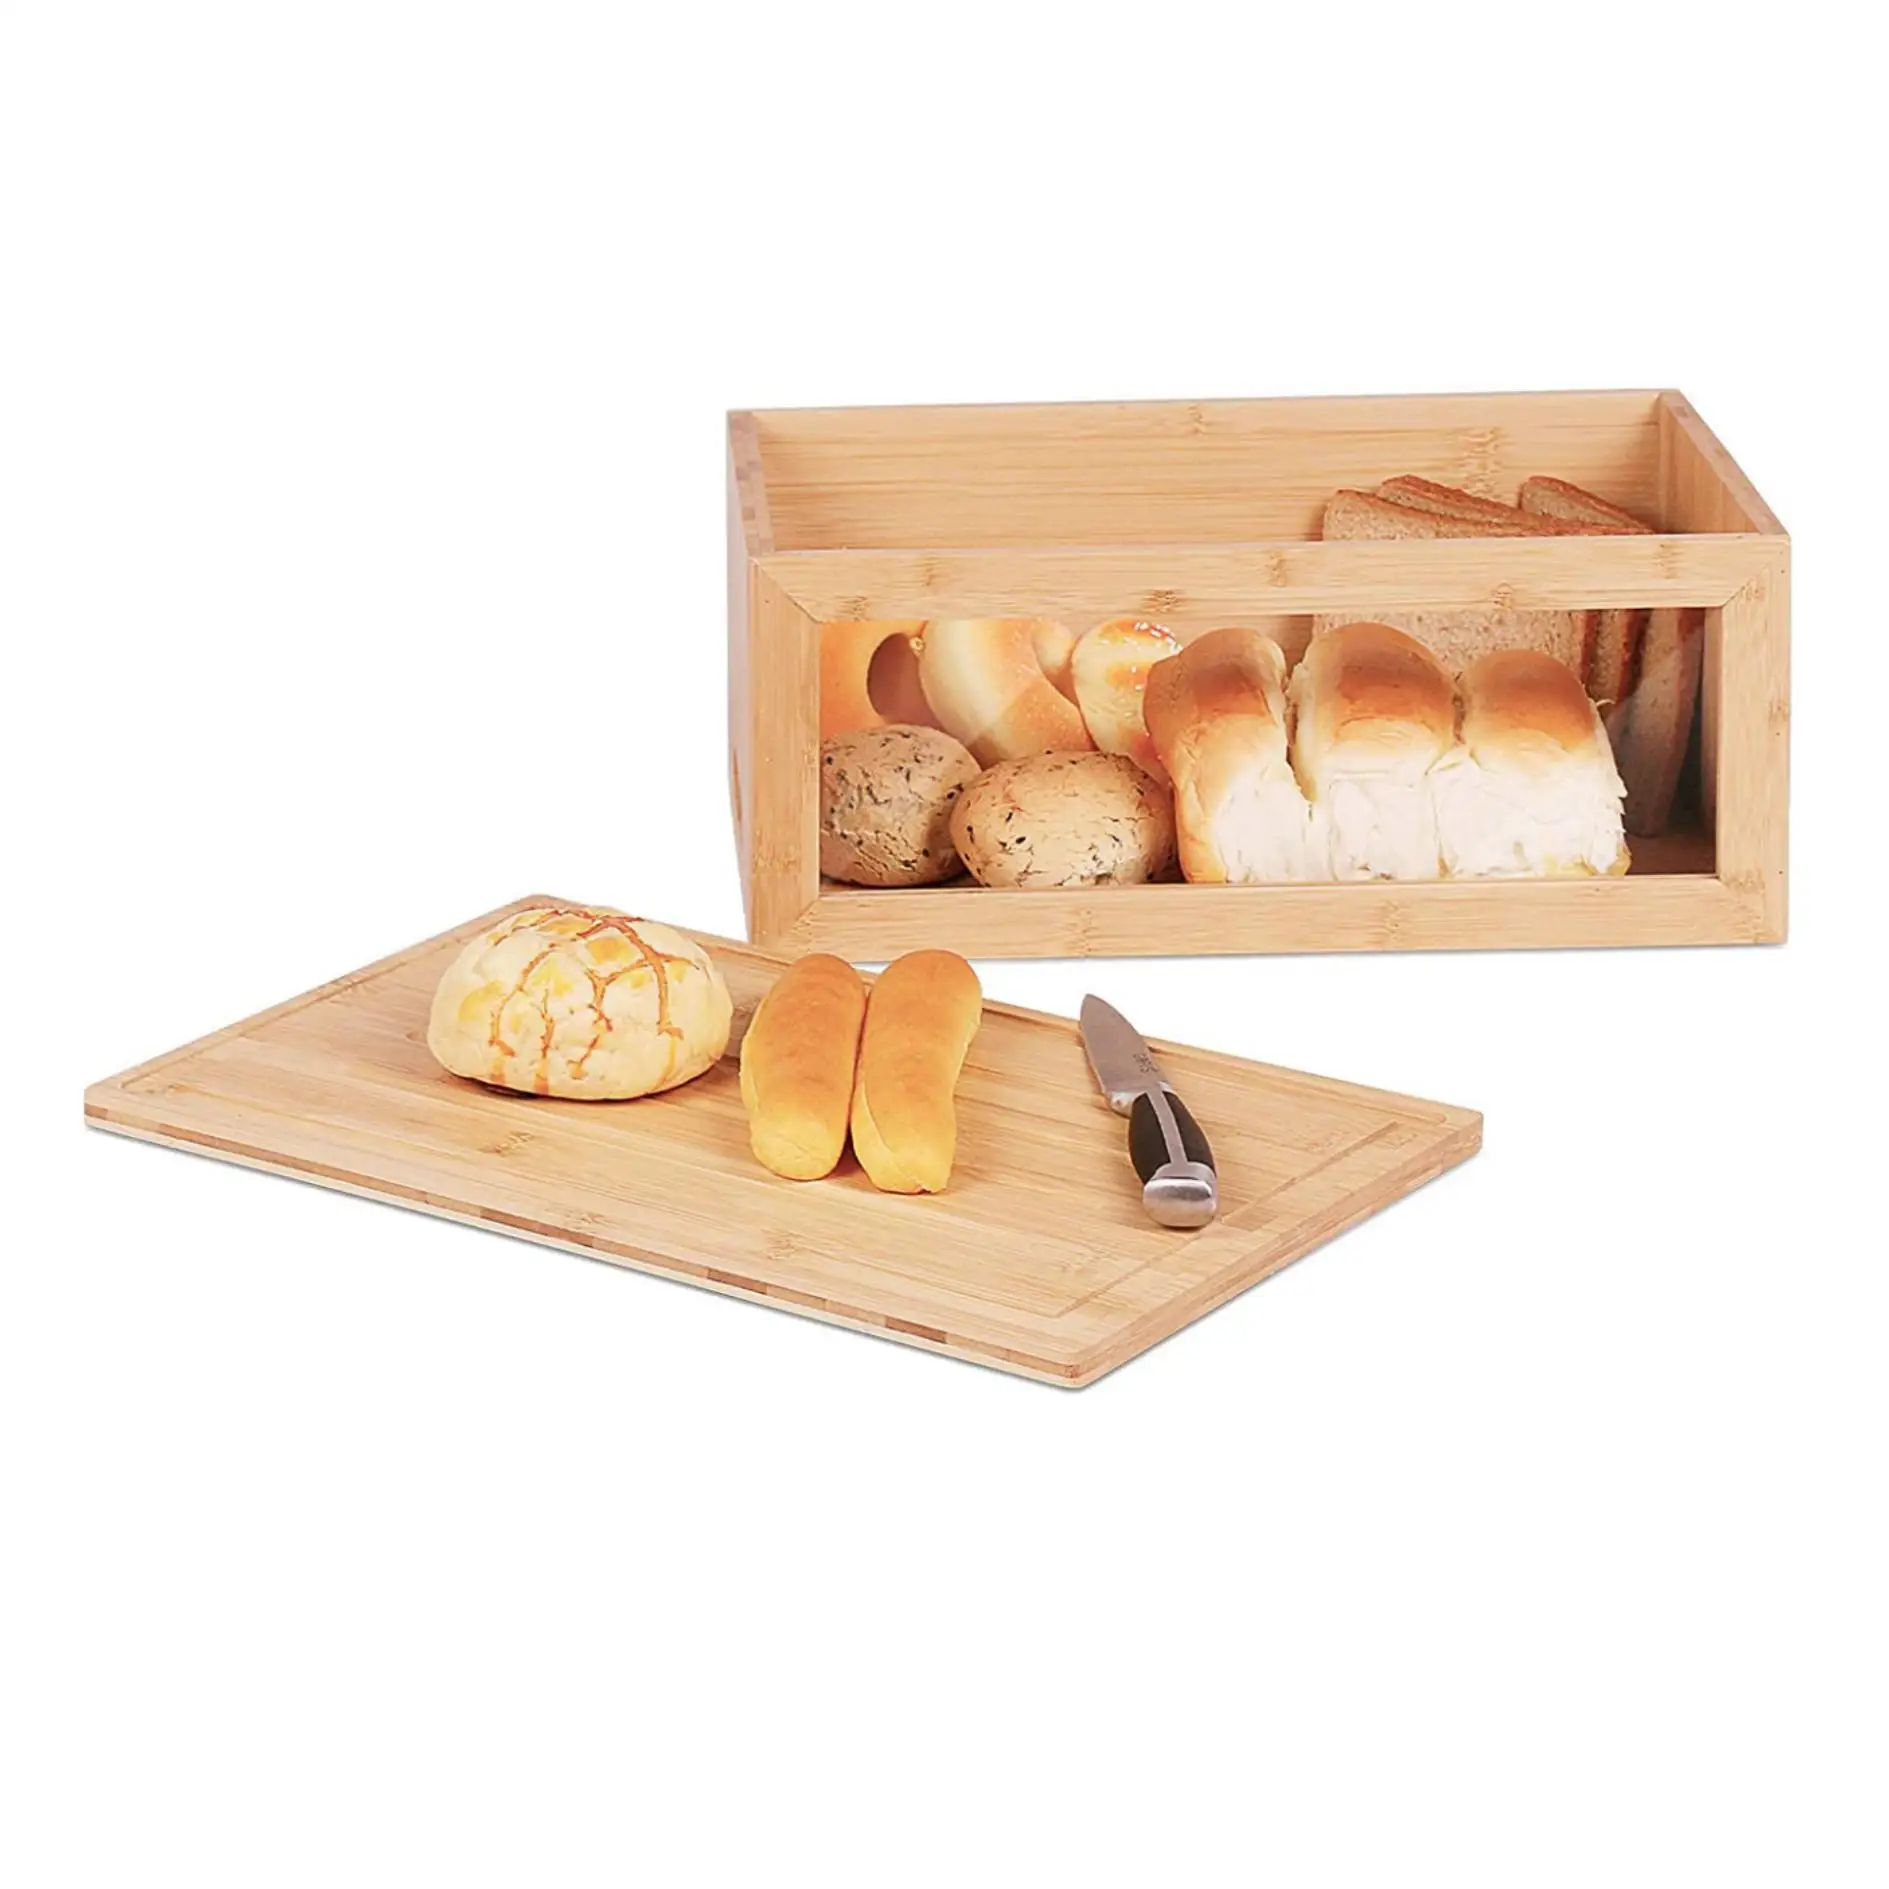 

Single Layer Bread BoxLarge Bread Box for Kitchen CounterWooden Large Capacity Bamboo Bread Food Storage Bin with Cutting